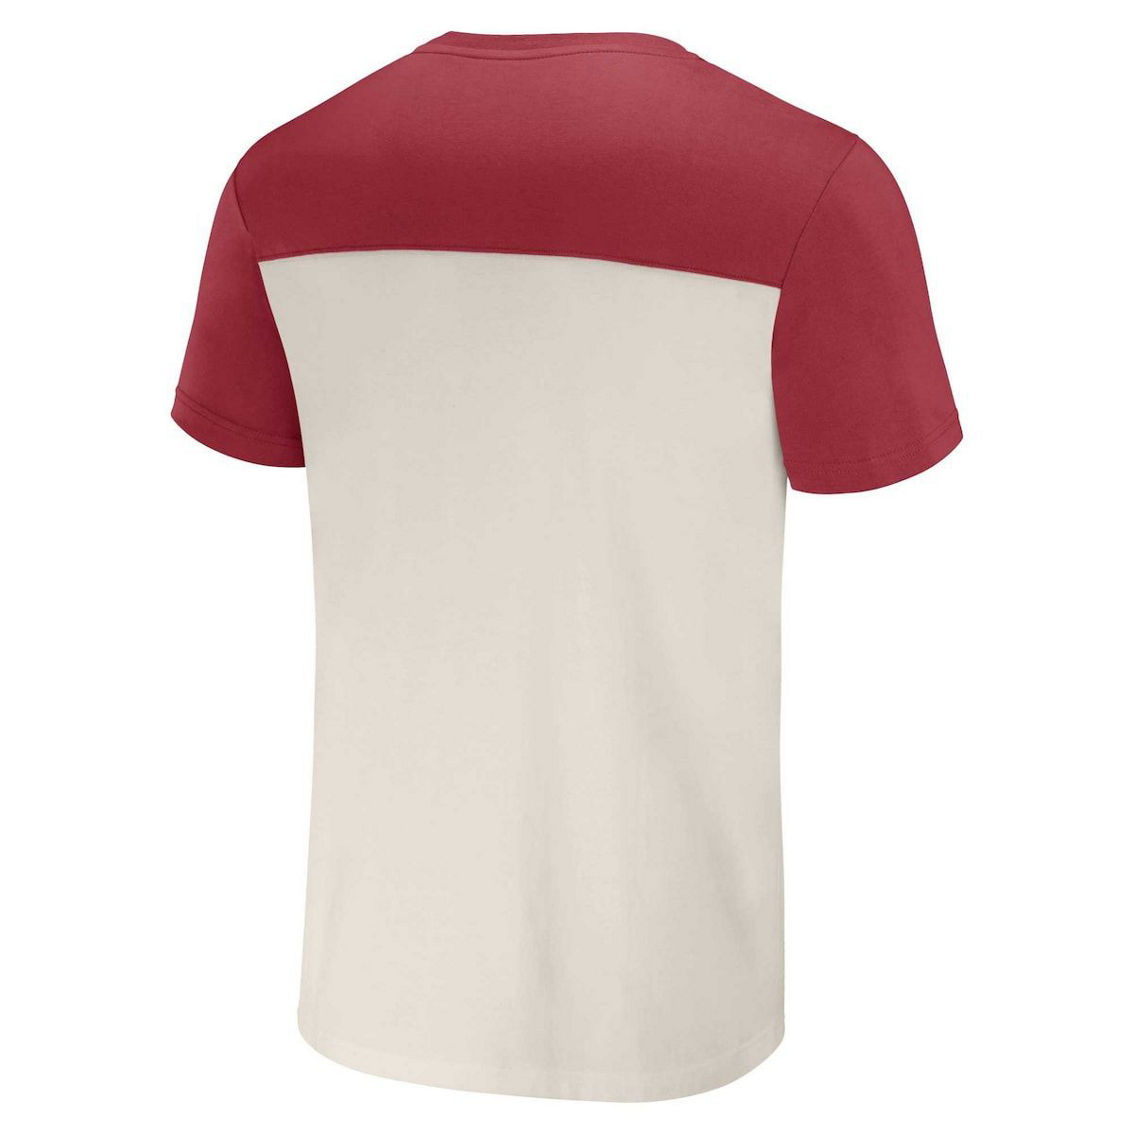 NFL x Darius Rucker Collection by Fanatics Men's Cream San Francisco 49ers Colorblocked T-Shirt - Image 4 of 4